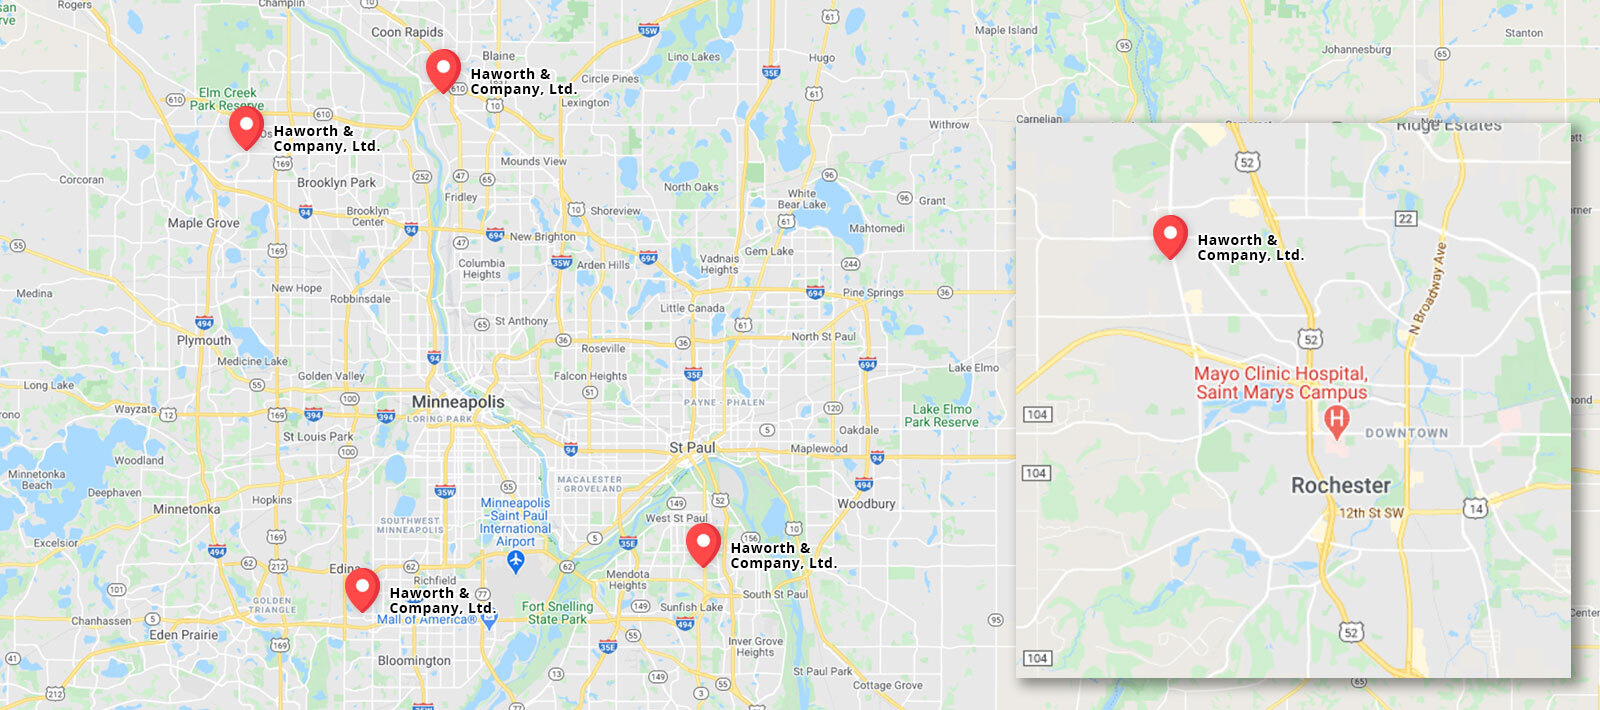 A map showing the locations of minneapolis, minneapolis, and st paul, minnesot.